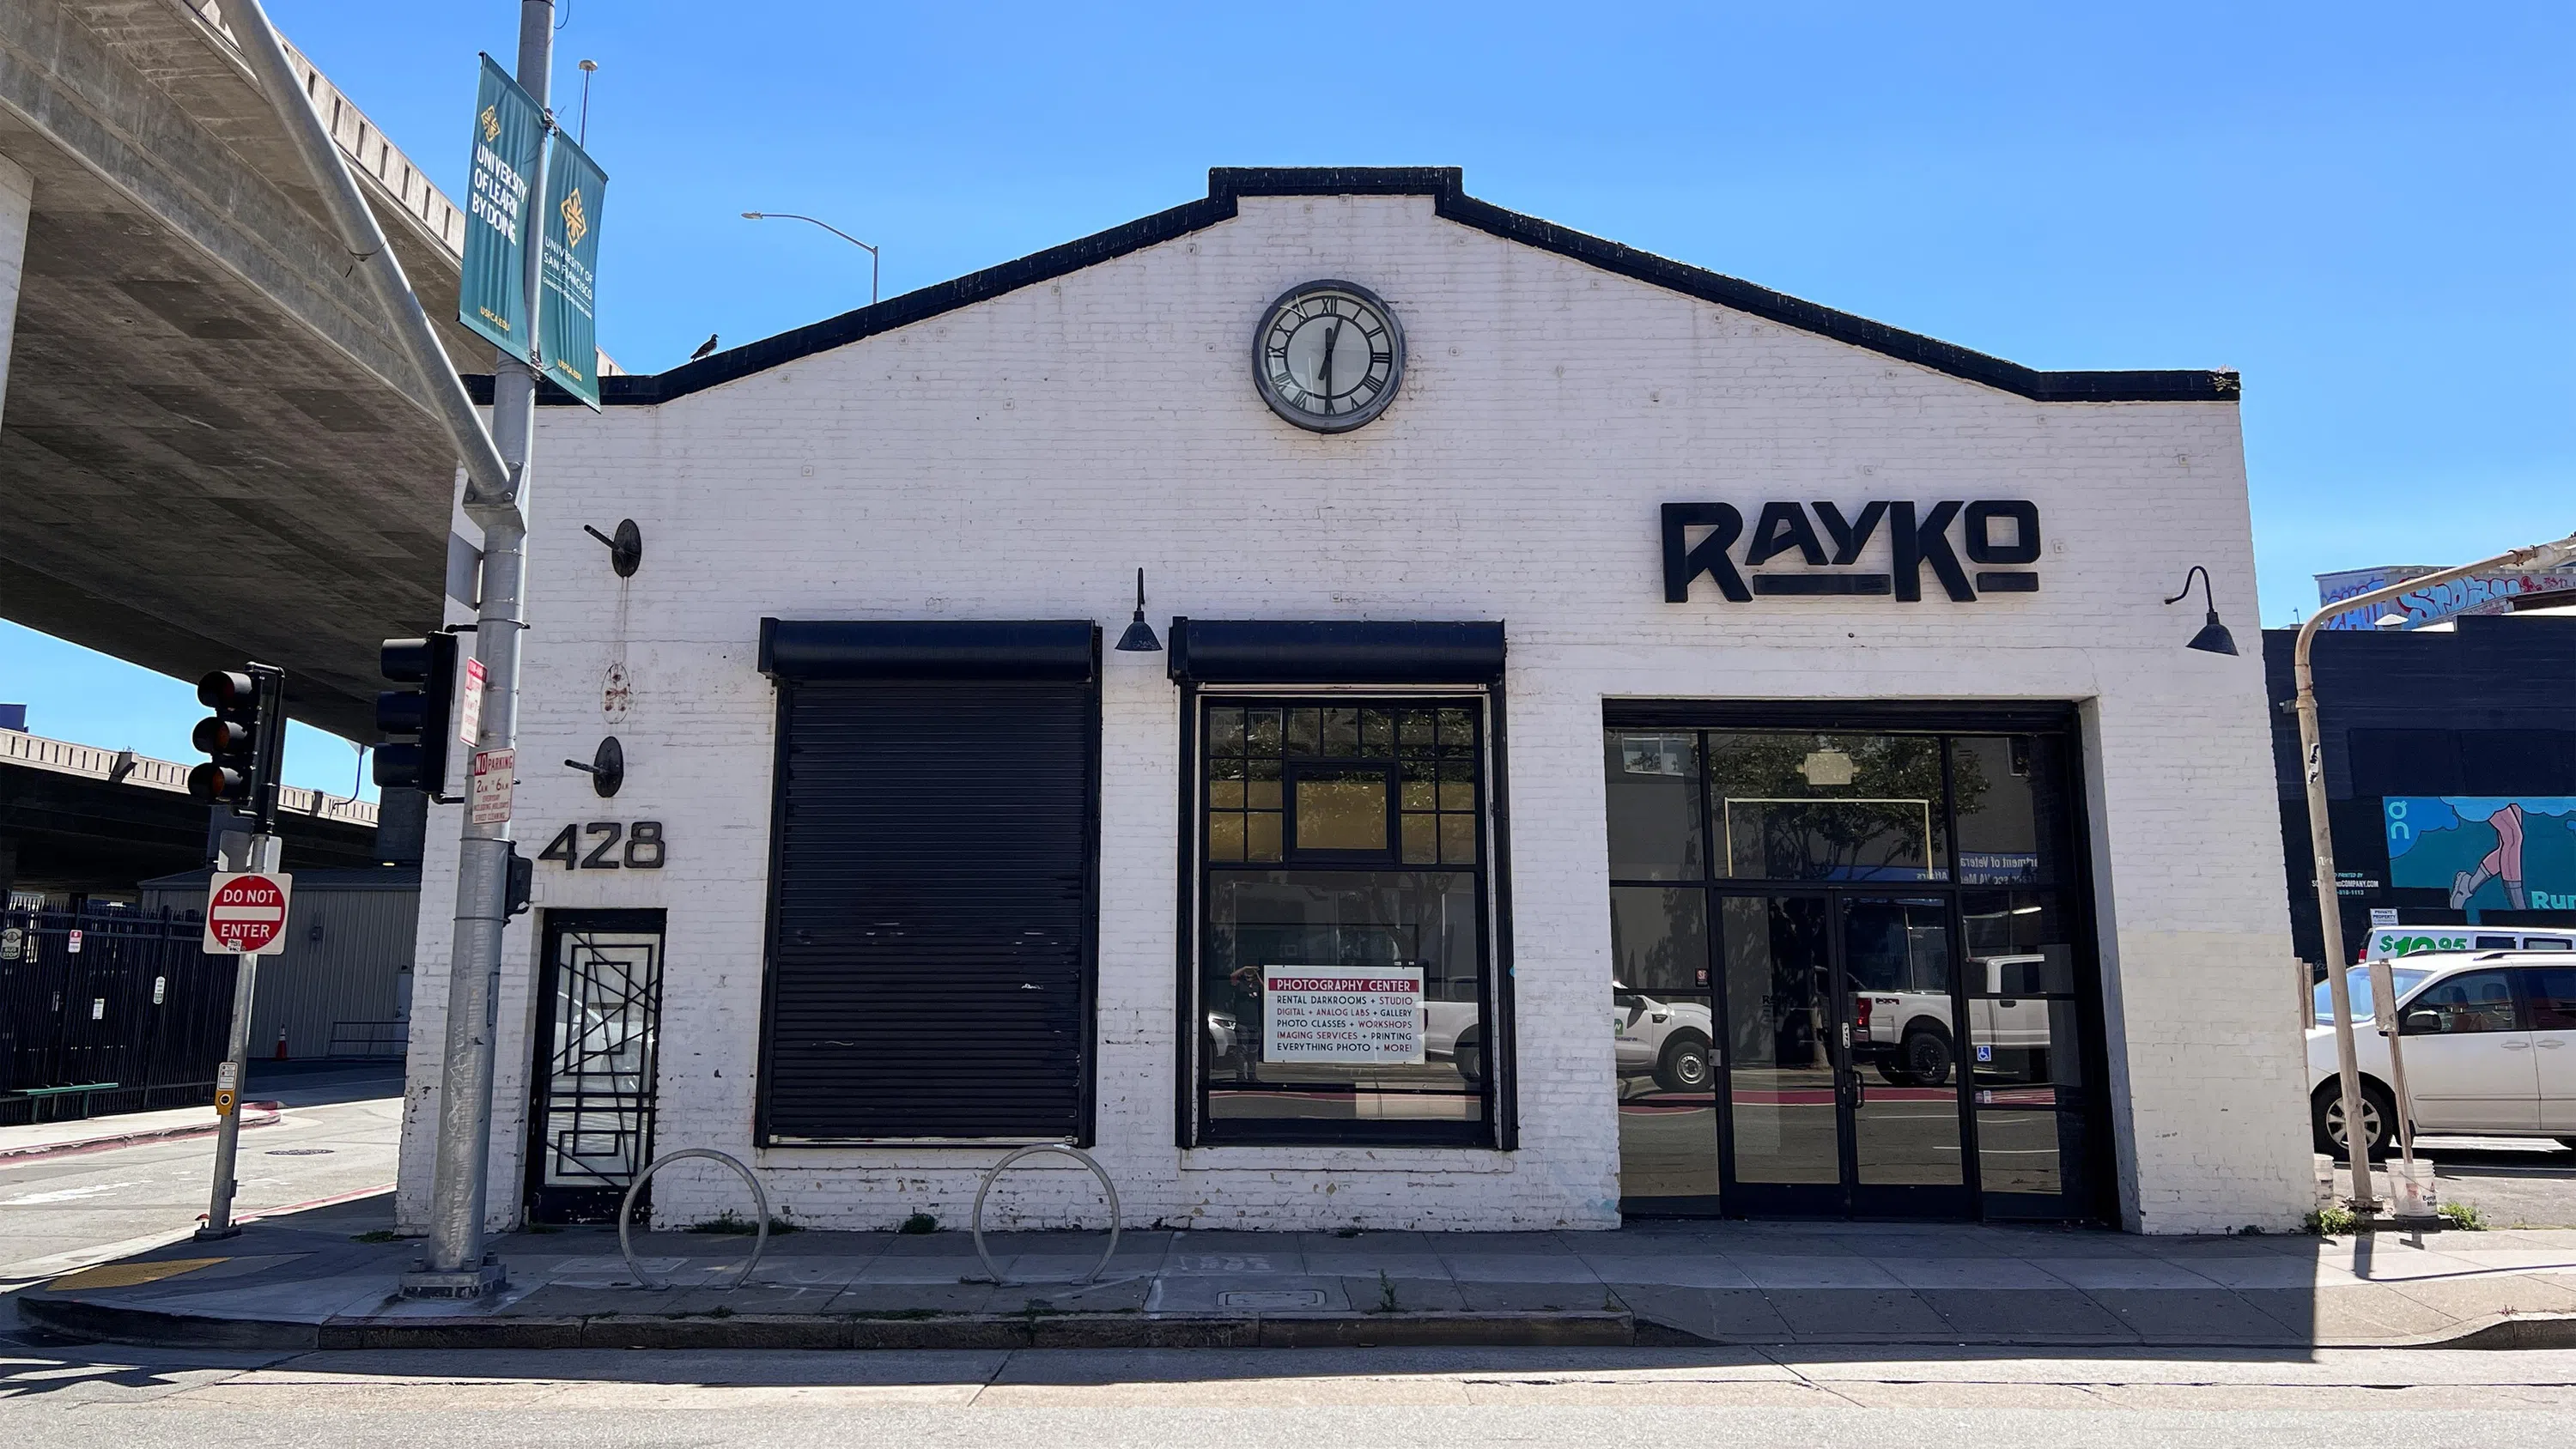 An exterior view of RayKo Photo Center in downtown San Francisco.